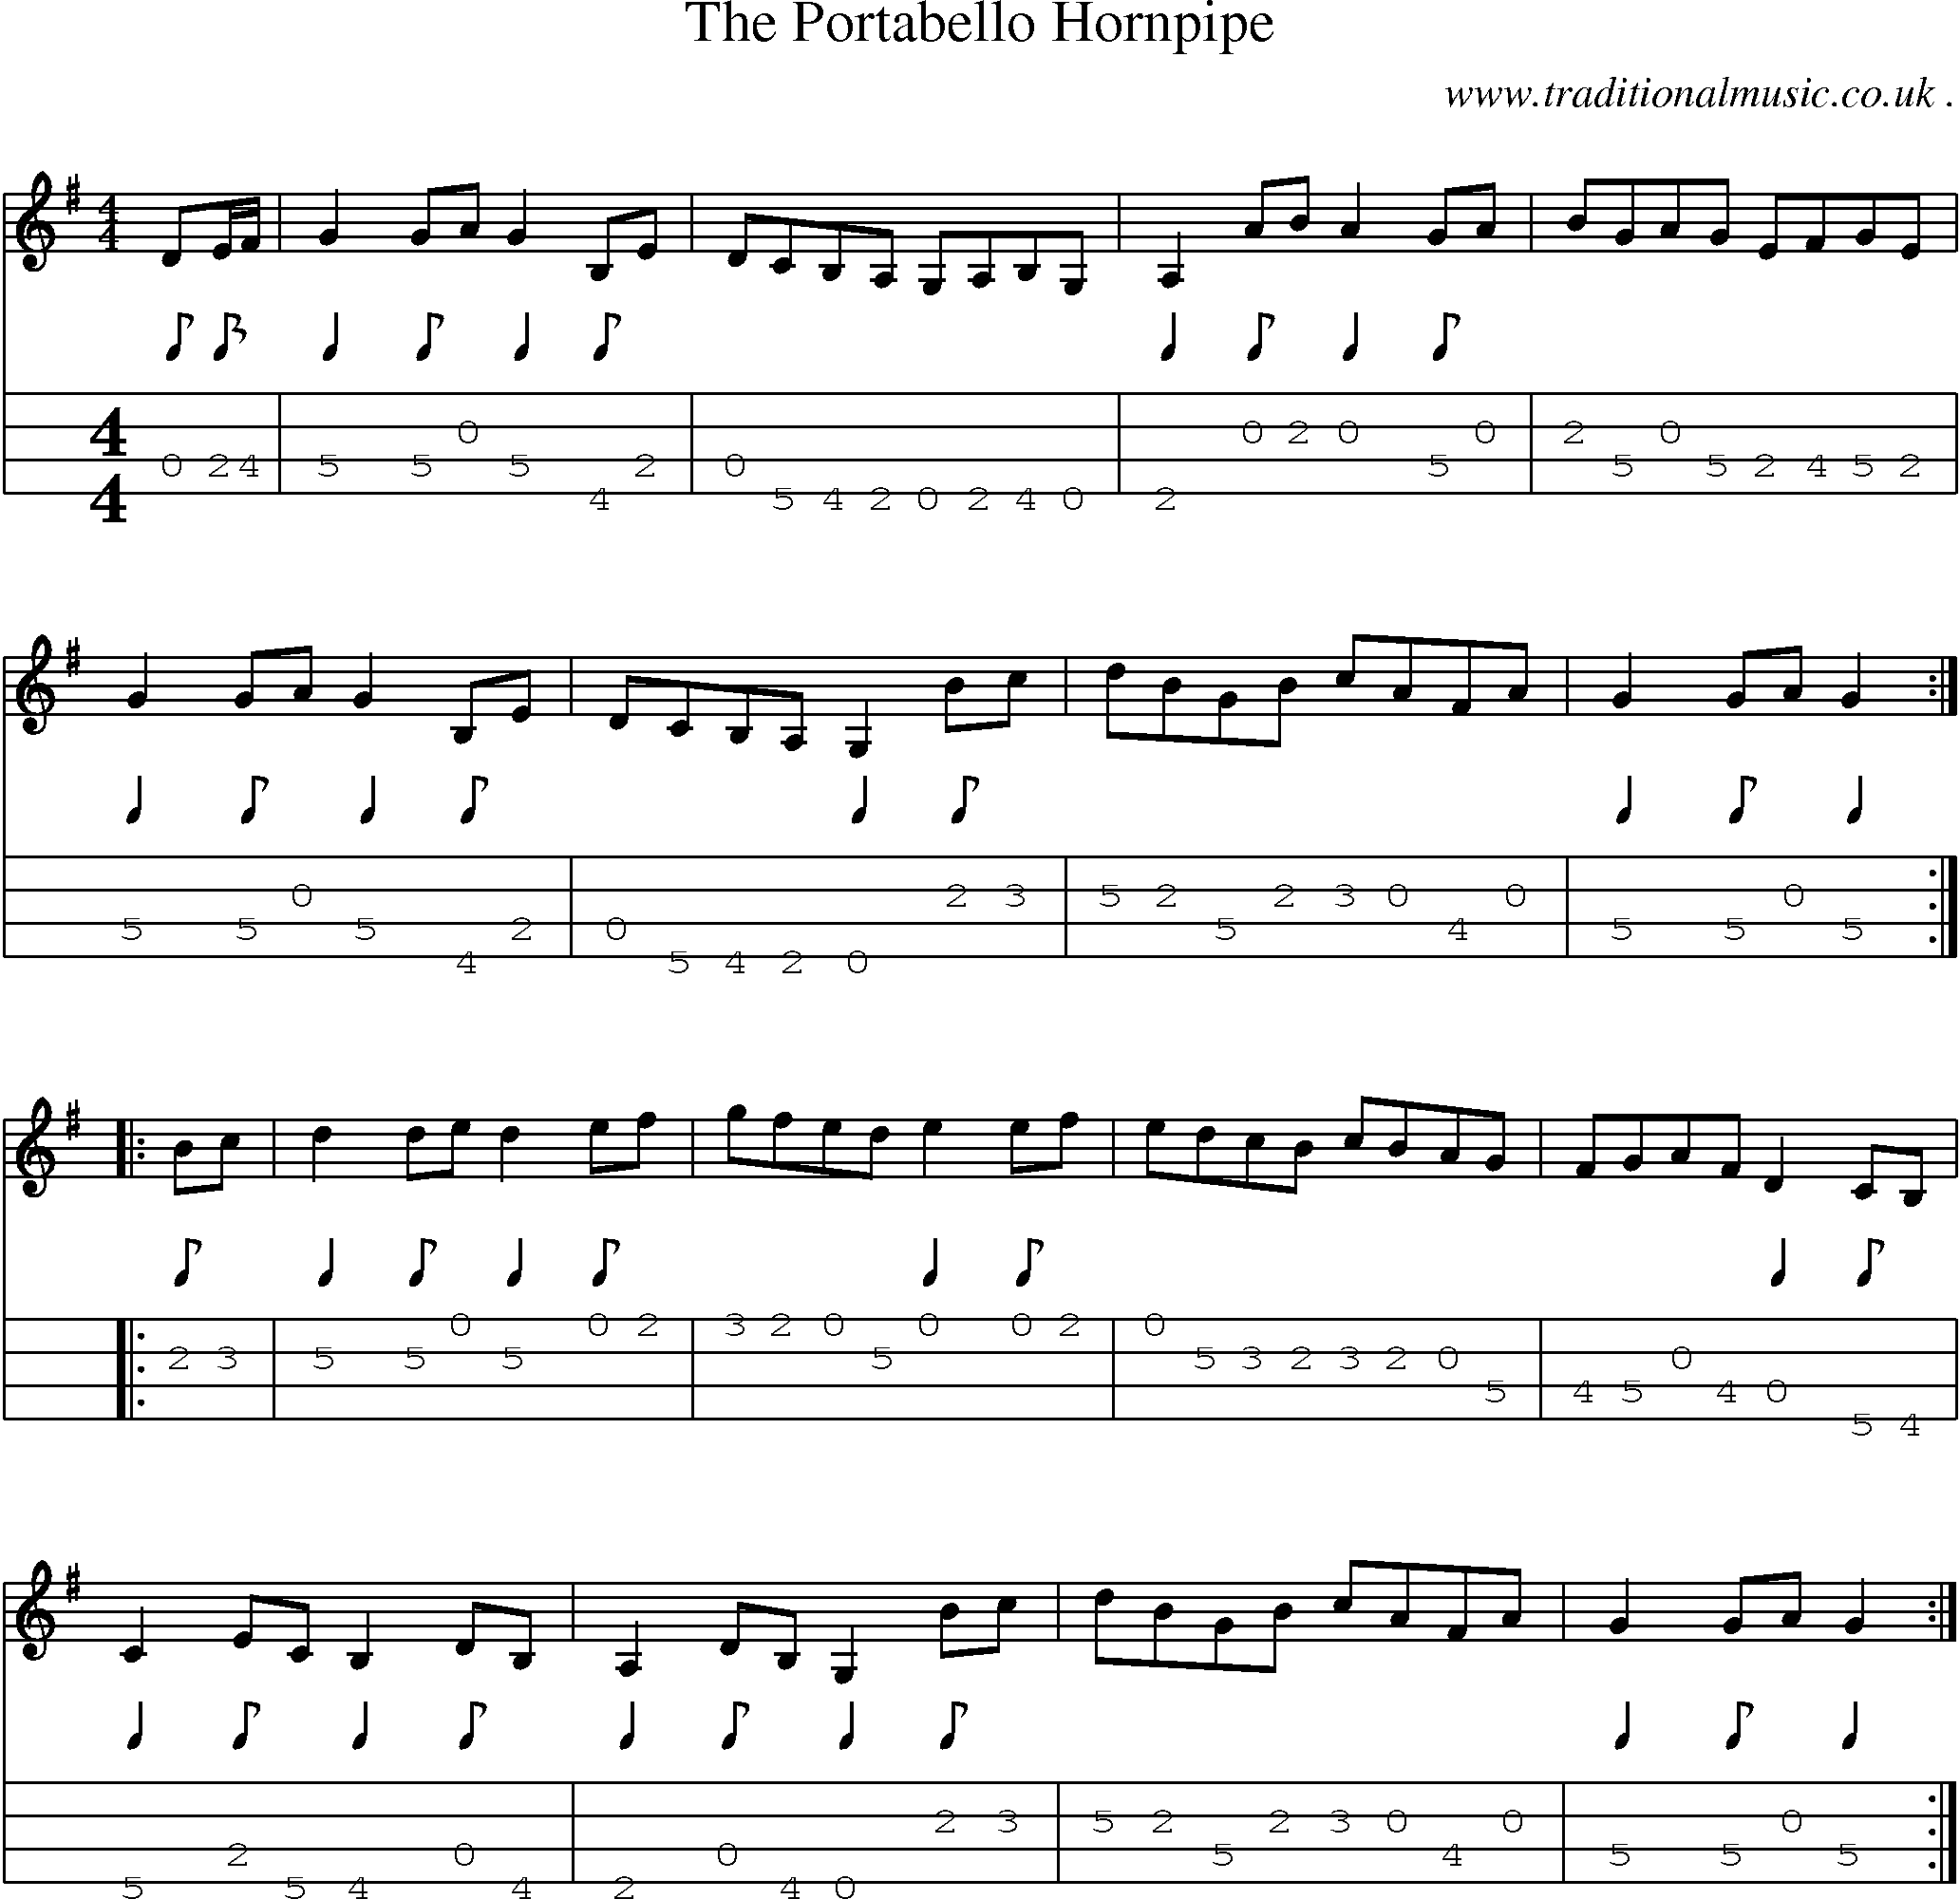 Sheet-Music and Mandolin Tabs for The Portabello Hornpipe